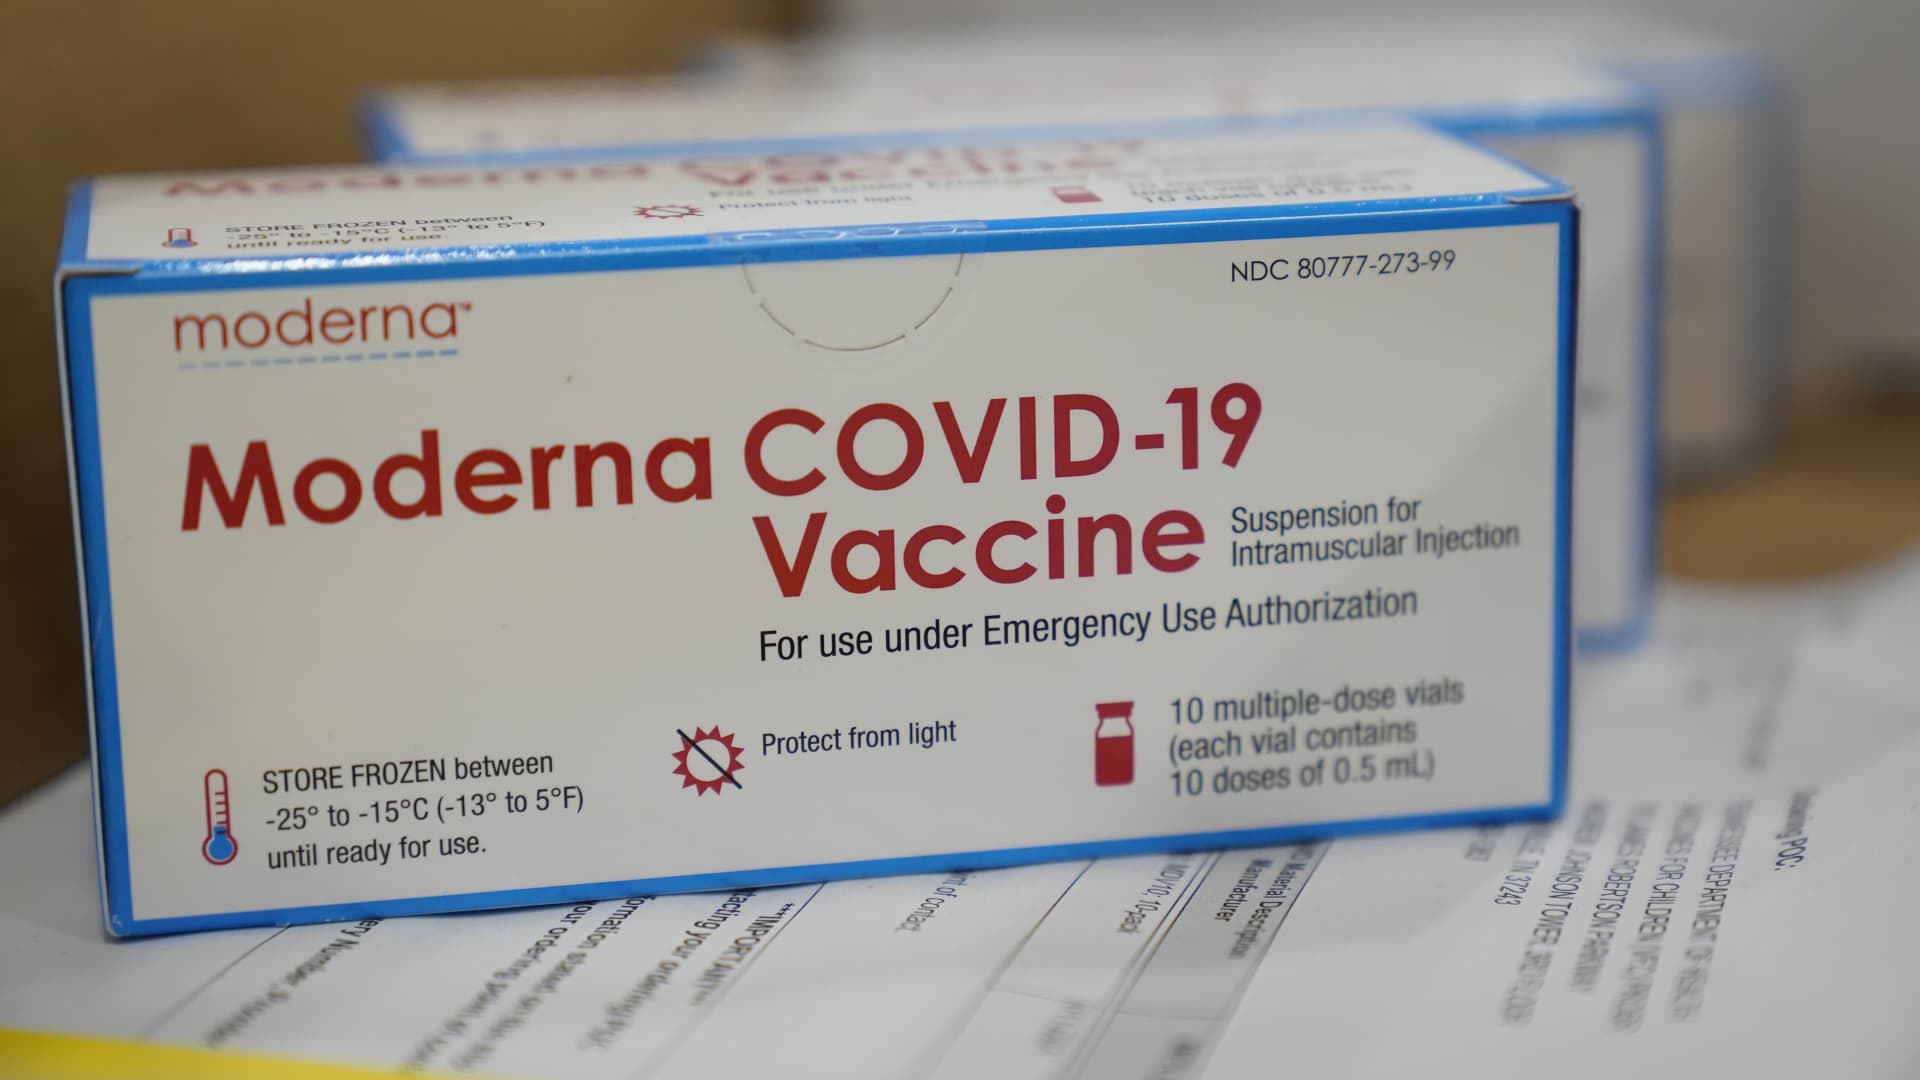 Boxes containing the Moderna COVID-19 vaccine are prepared to be shipped at the McKesson distribution center in Olive Branch, Mississippi.